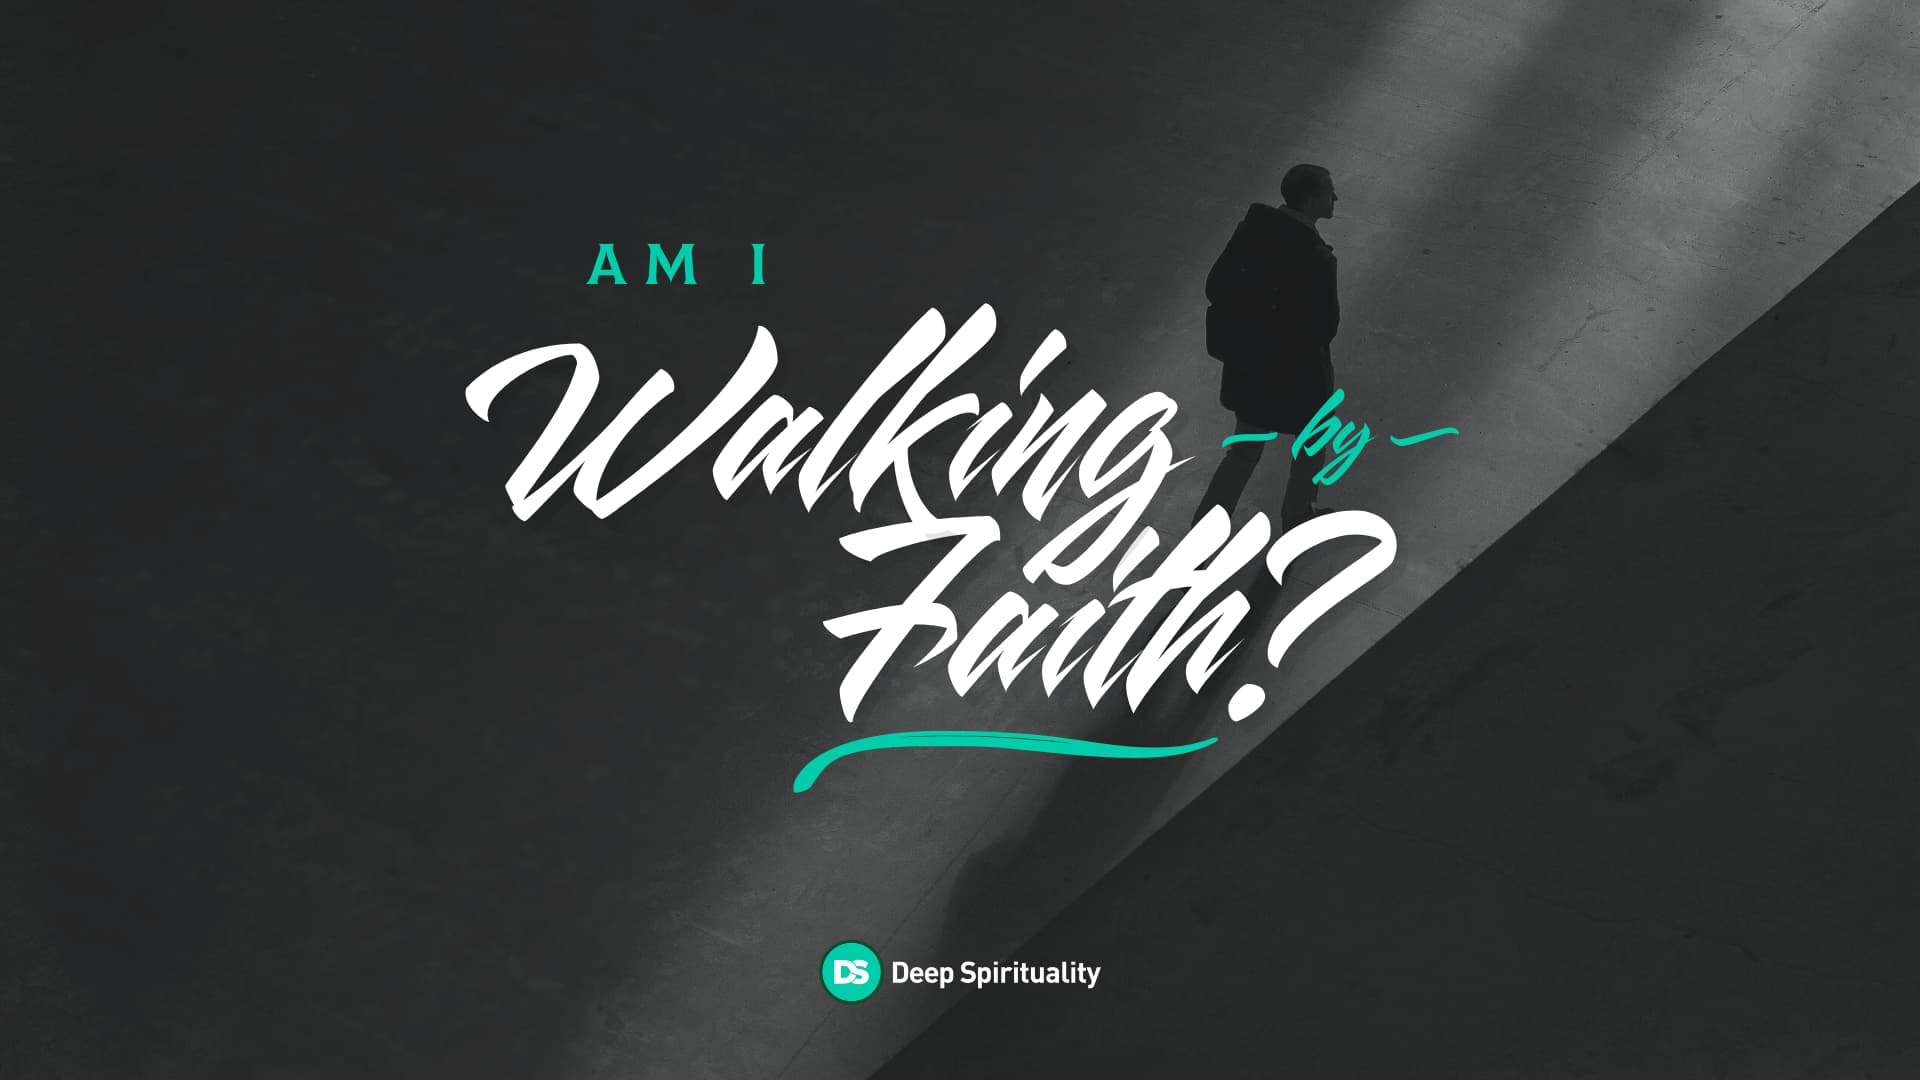 How Do I Know if I’m Walking by Faith? 2